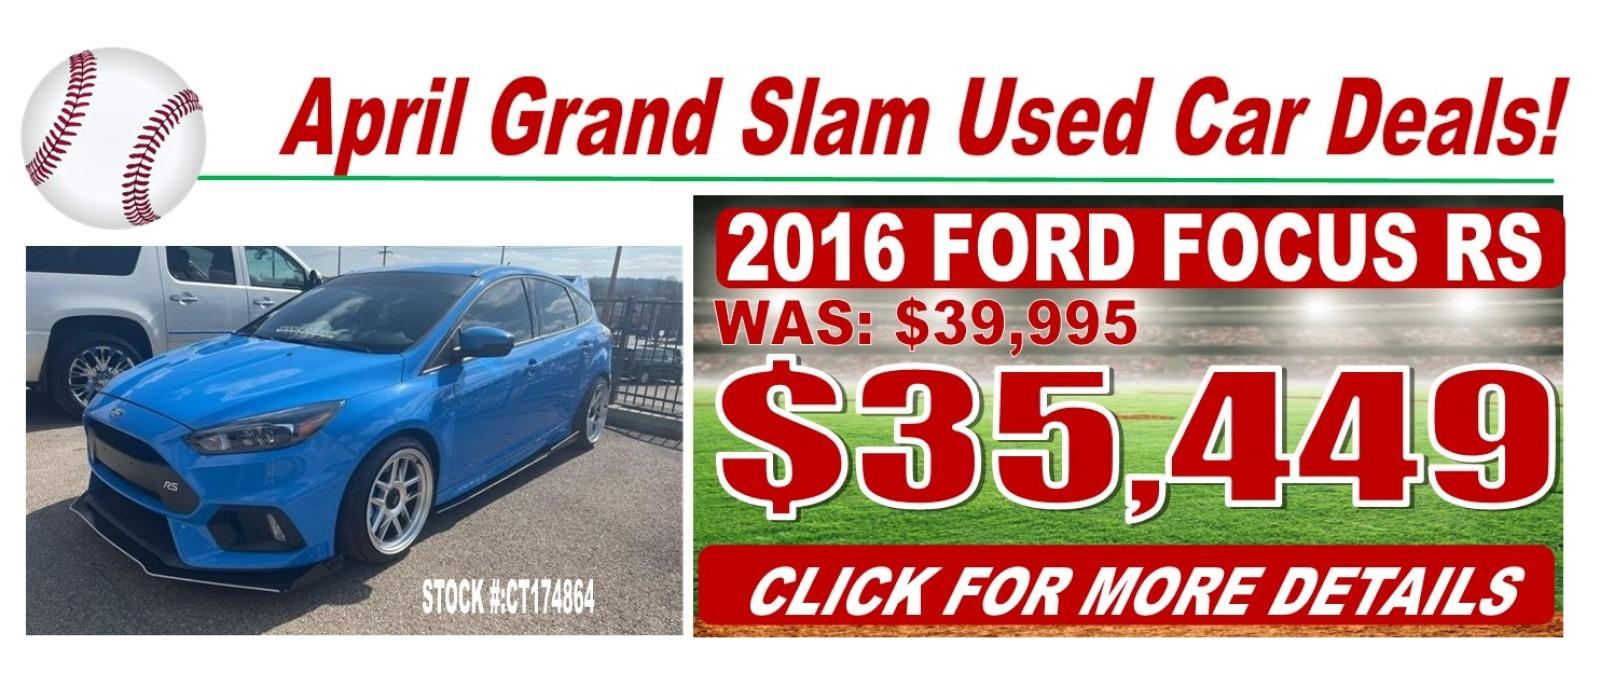 2016 Ford Focus for $35,449